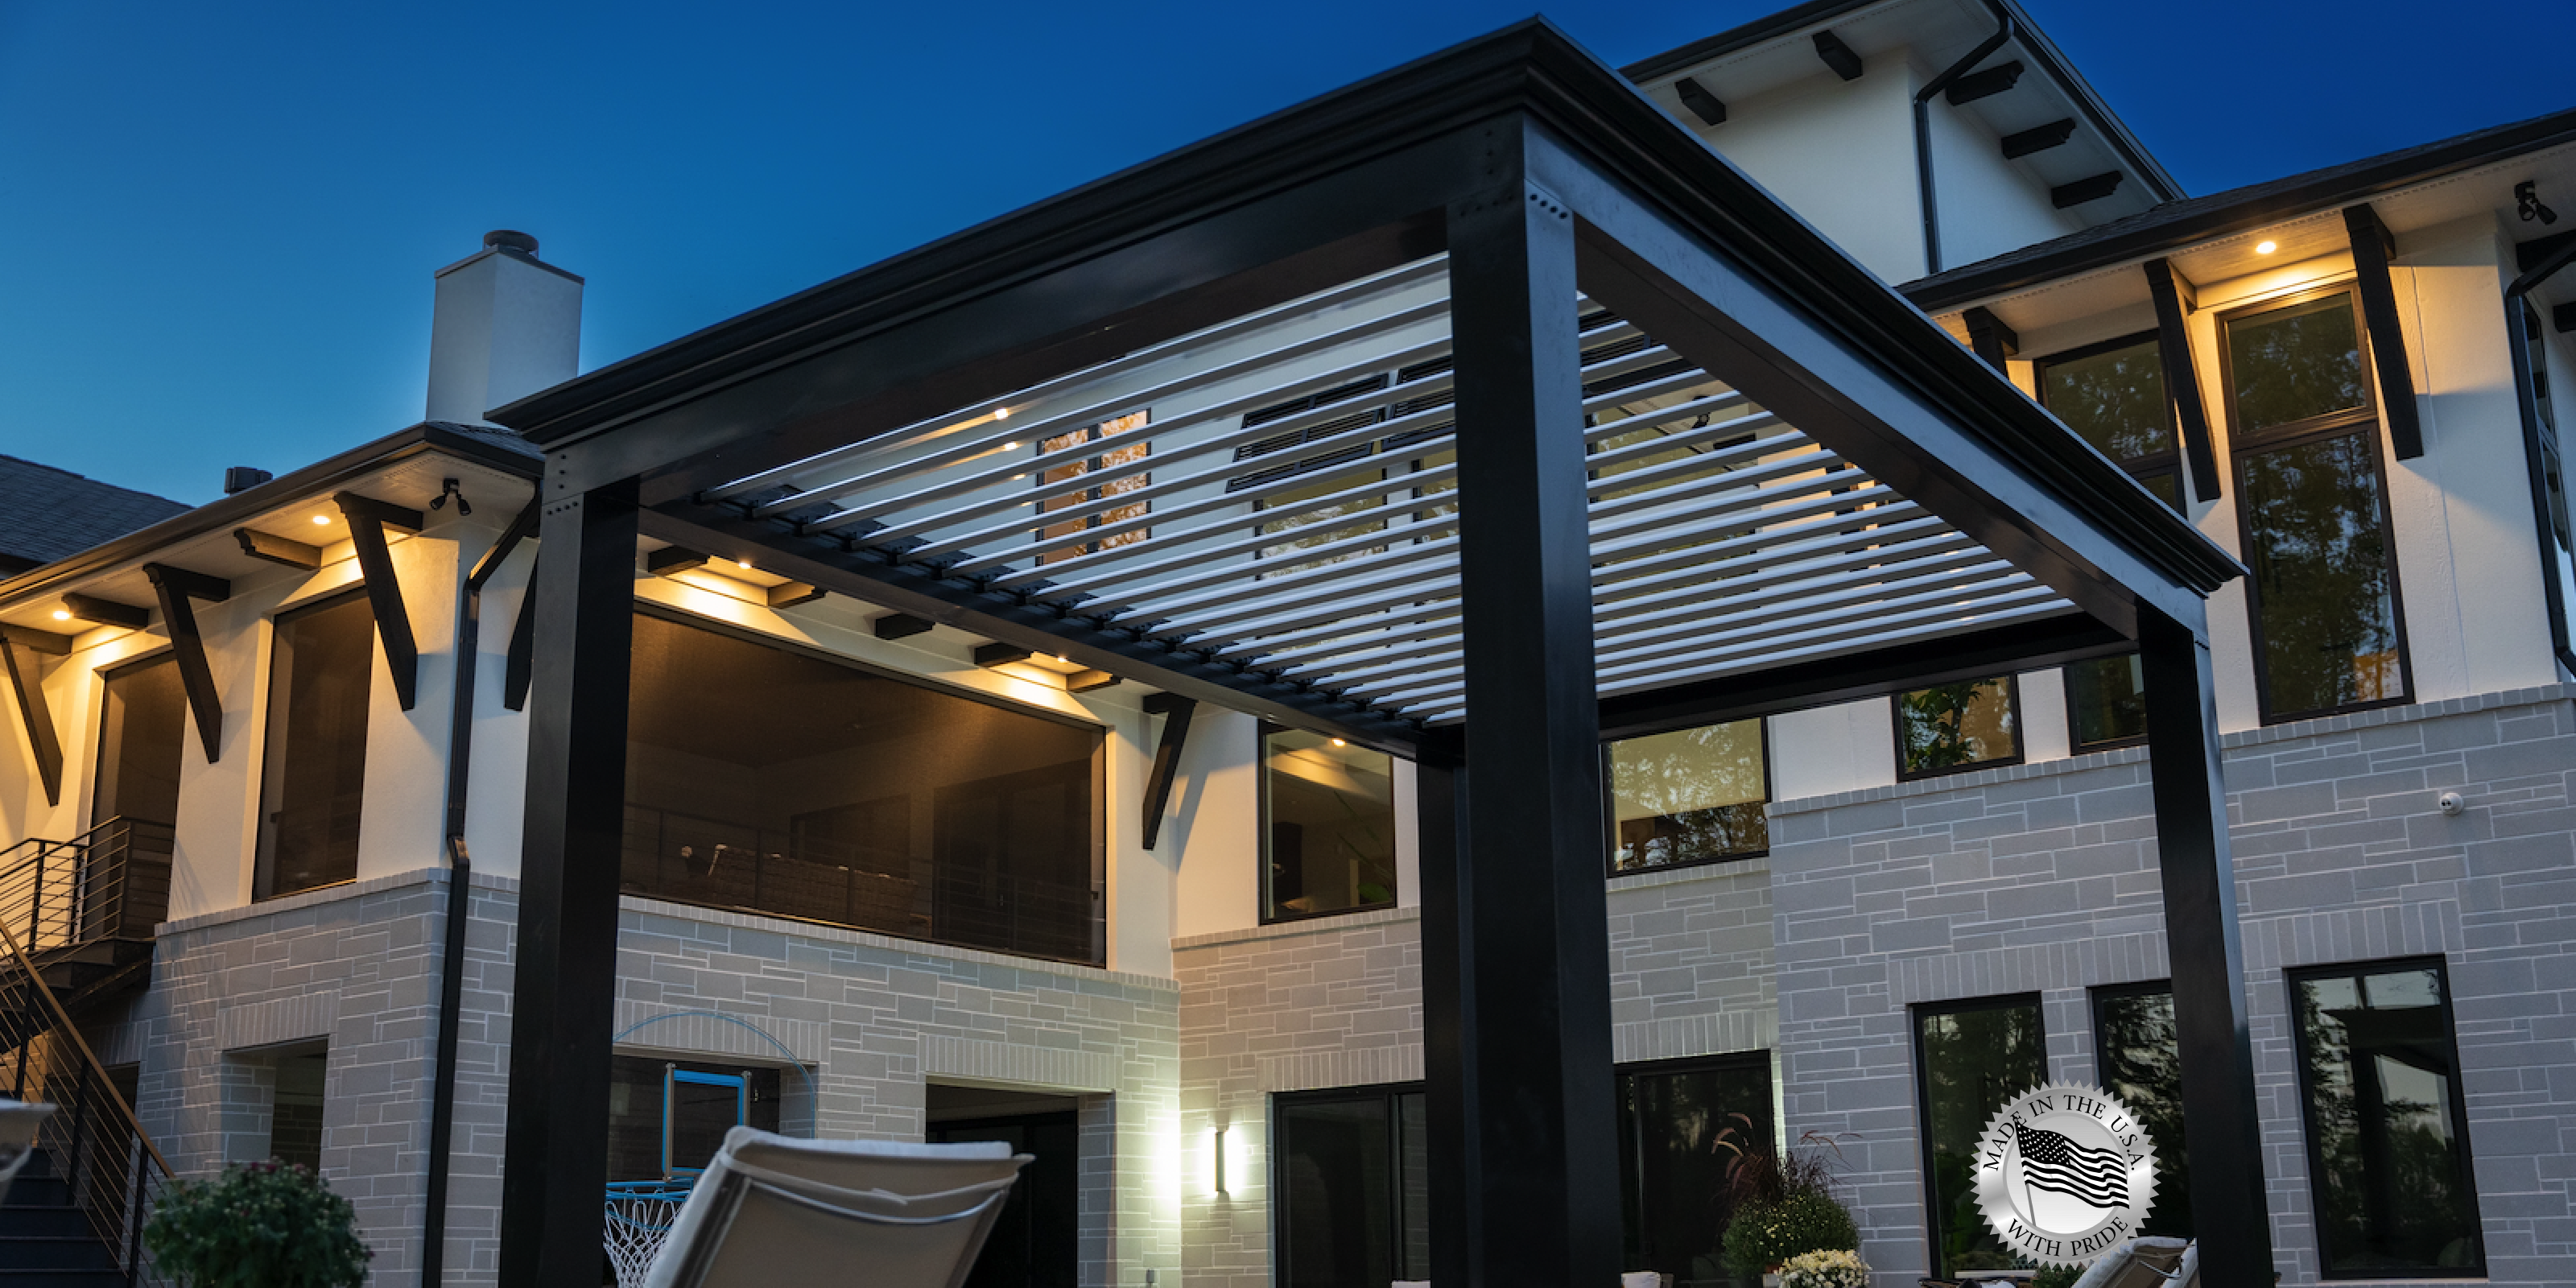 Outdoor living made easy with aluminum pergolas for your backyard space and outdoor living space